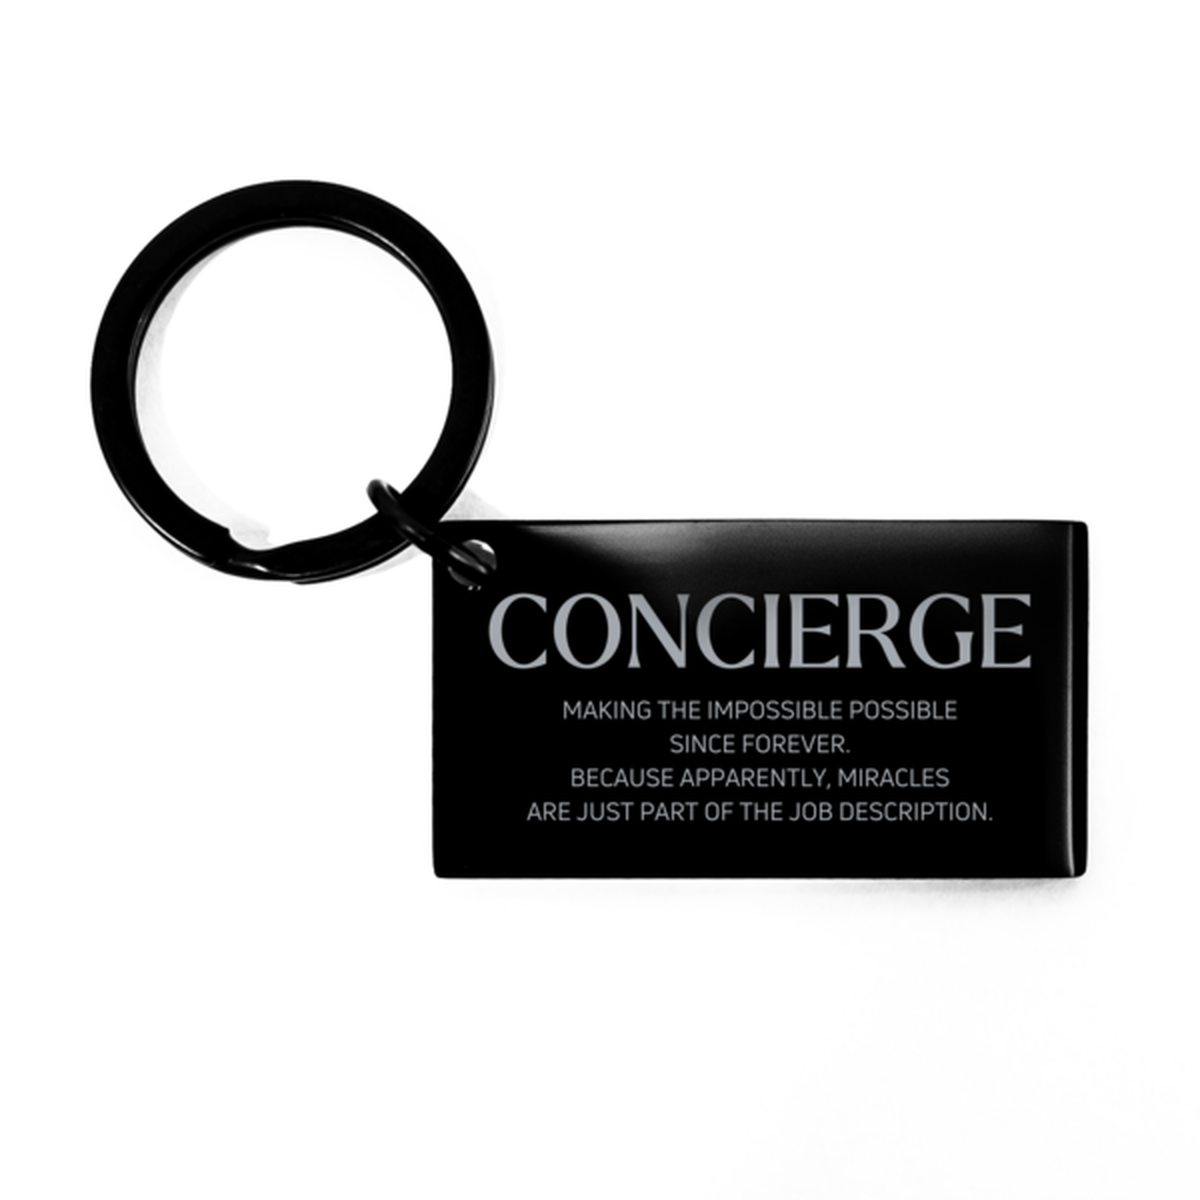 Funny Concierge Gifts, Miracles are just part of the job description, Inspirational Birthday Keychain For Concierge, Men, Women, Coworkers, Friends, Boss